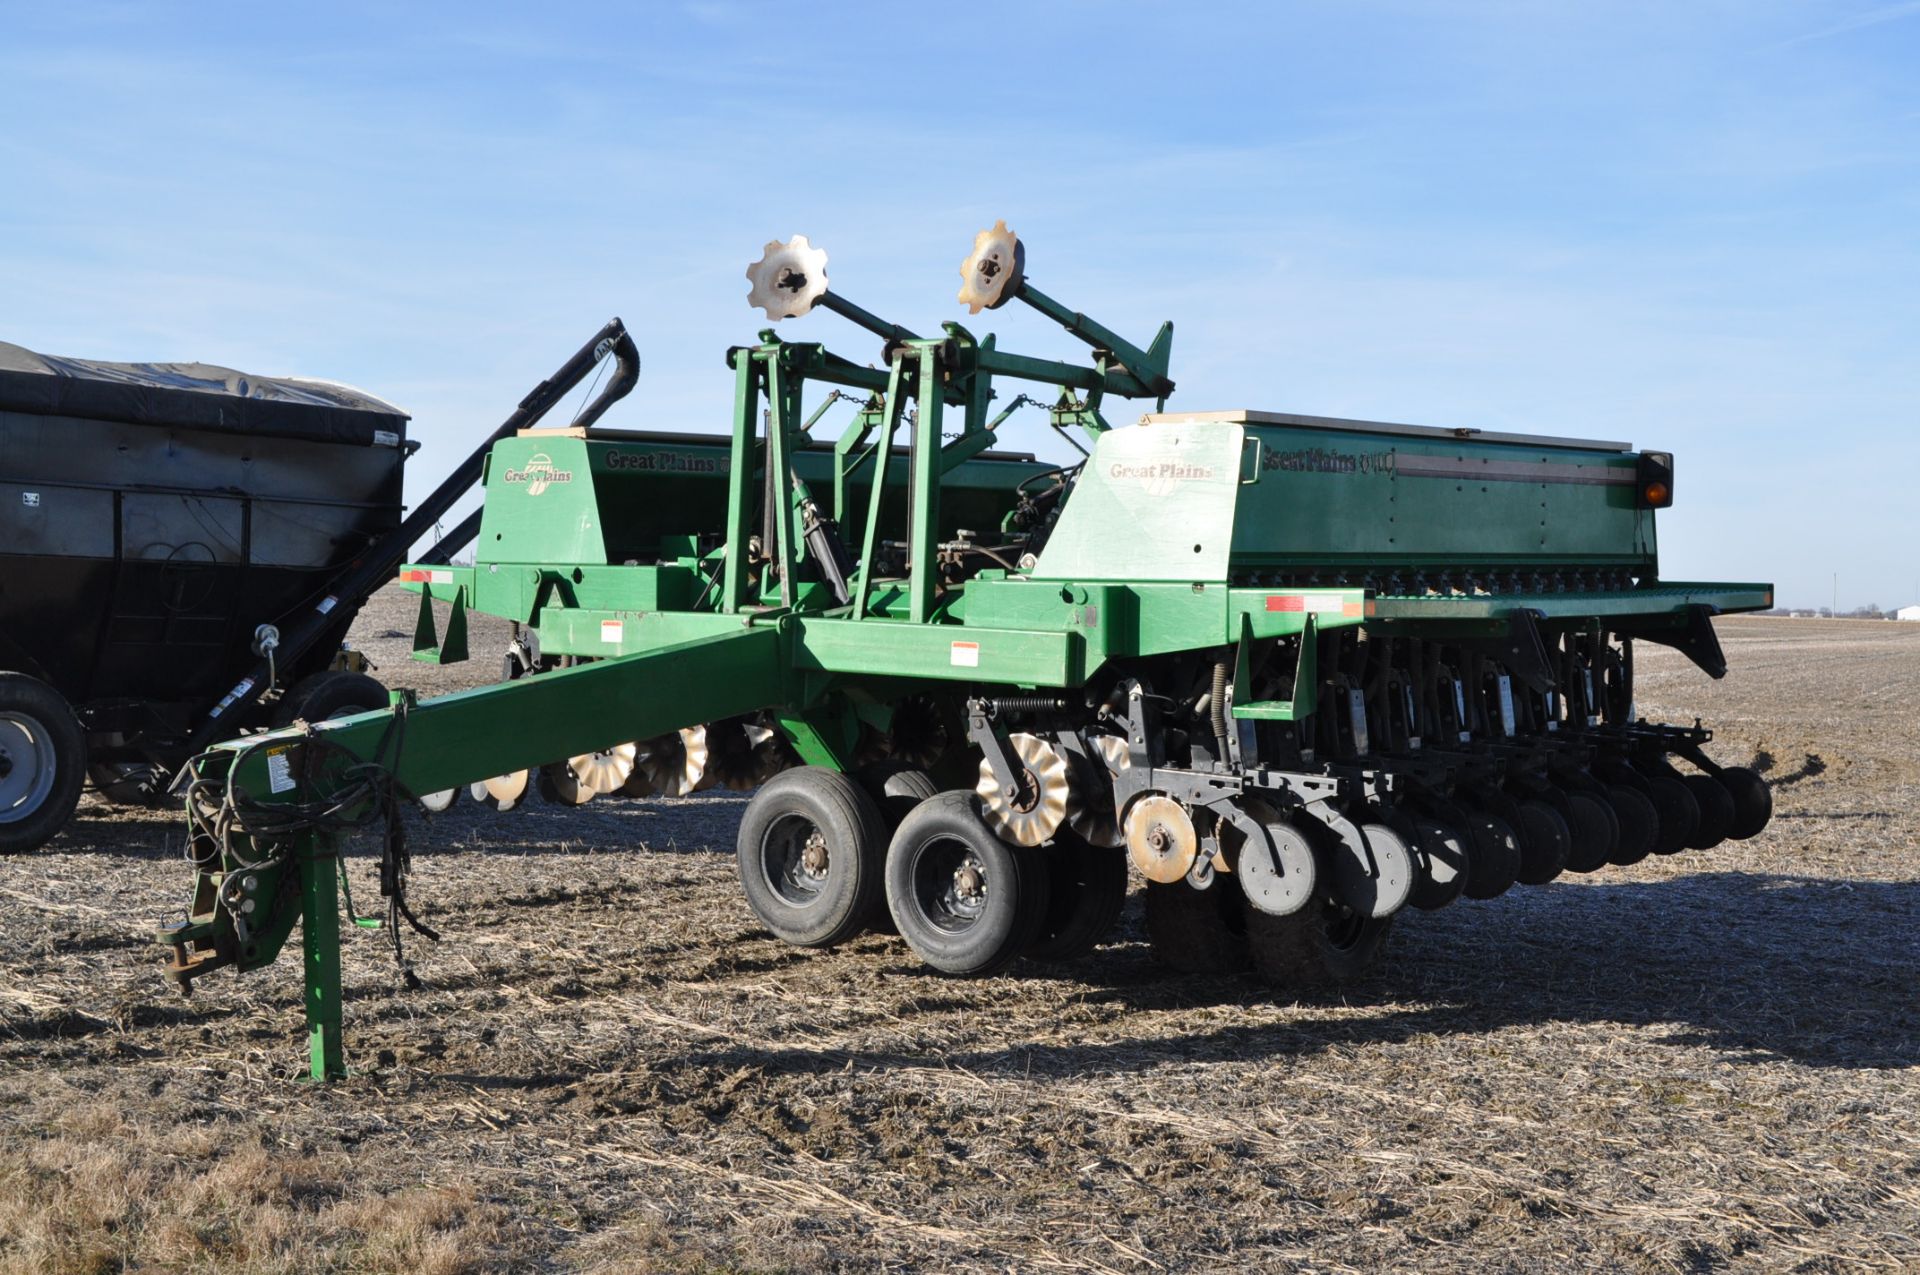 24’ Great Plains Solid Stand 2410NT drill, no-till coulters, seed loc wheel, single rubber press - Image 2 of 17